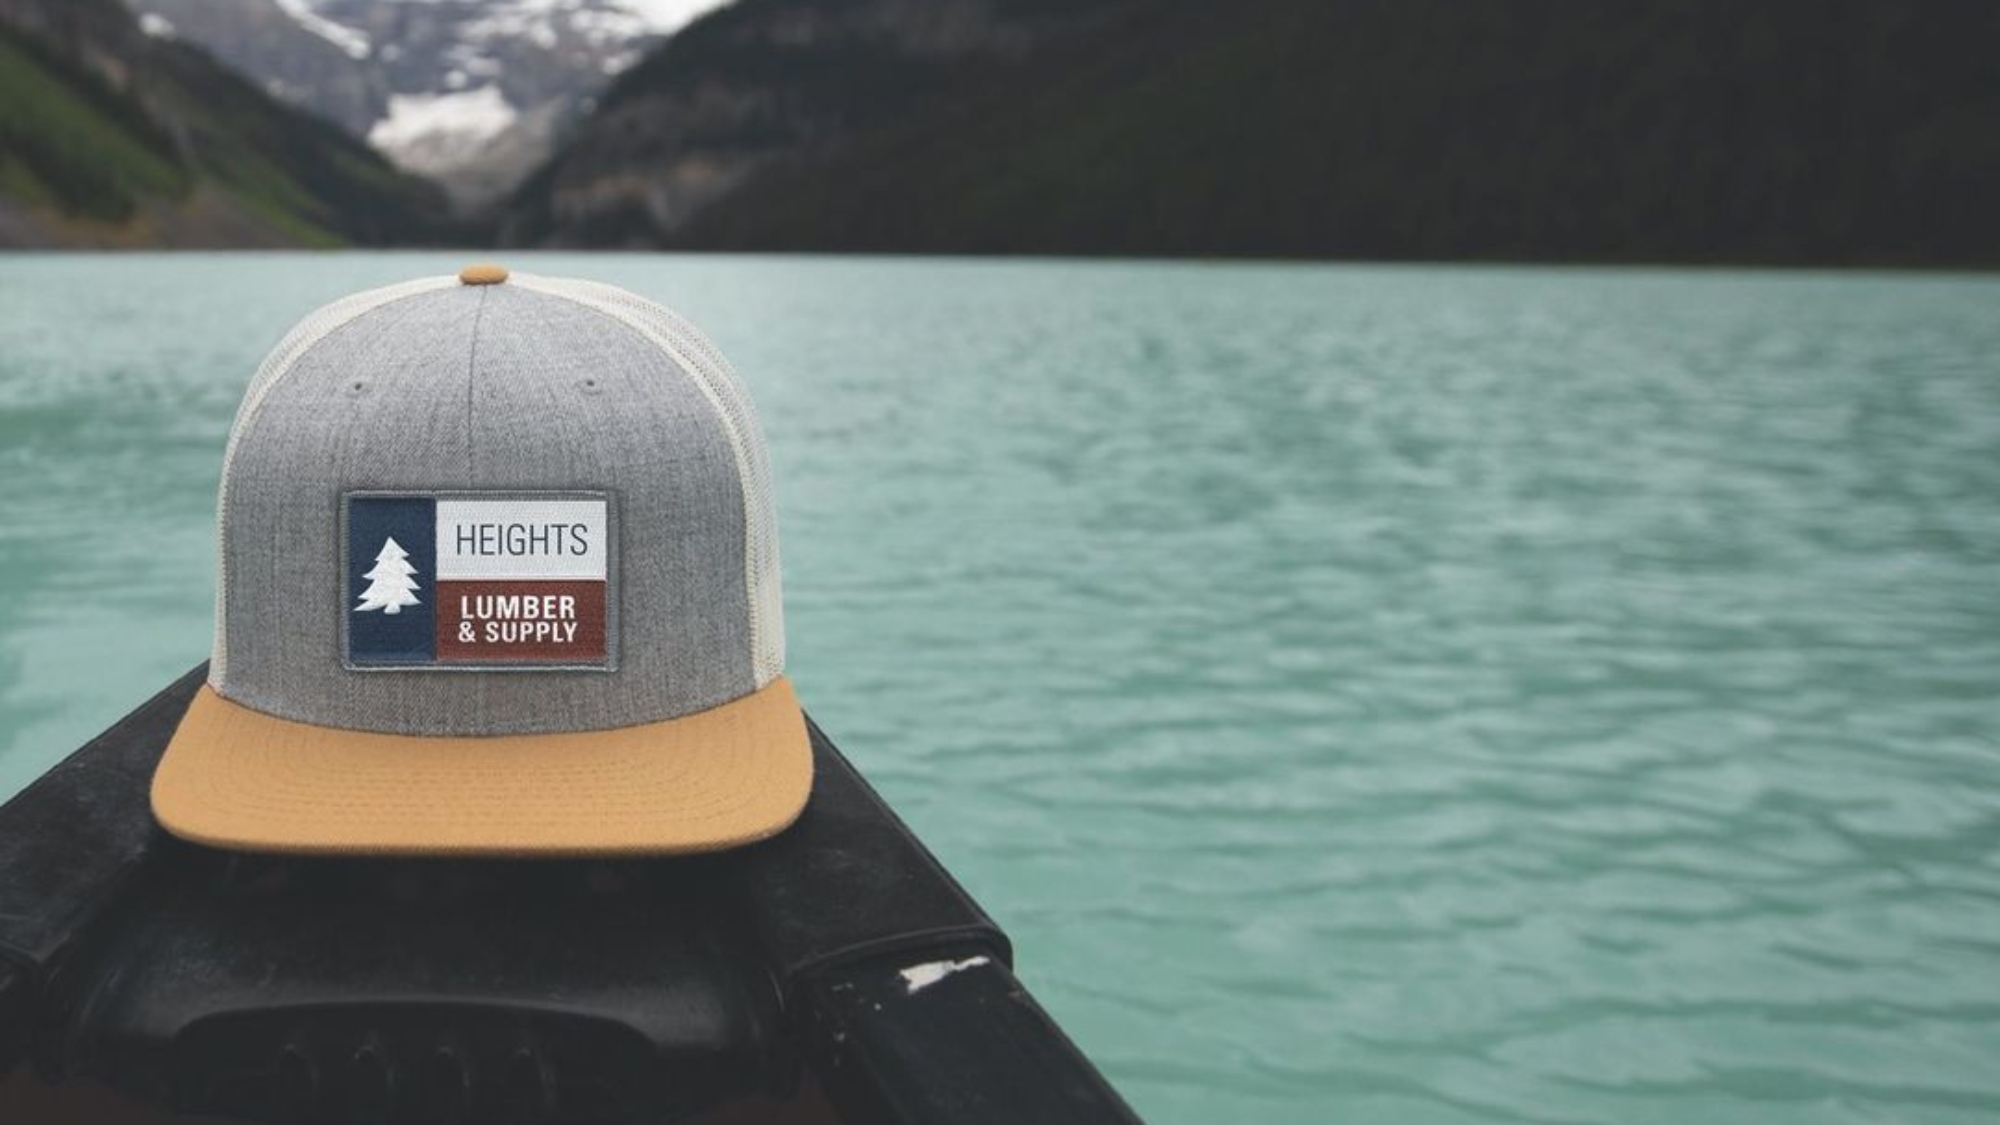 Discover how custom Richardson 112 hats can boost your brand's visibility and style. Explore the benefits of branded trucker caps and how Gott Marketing can help you order your personalized Richardson 112 hats.